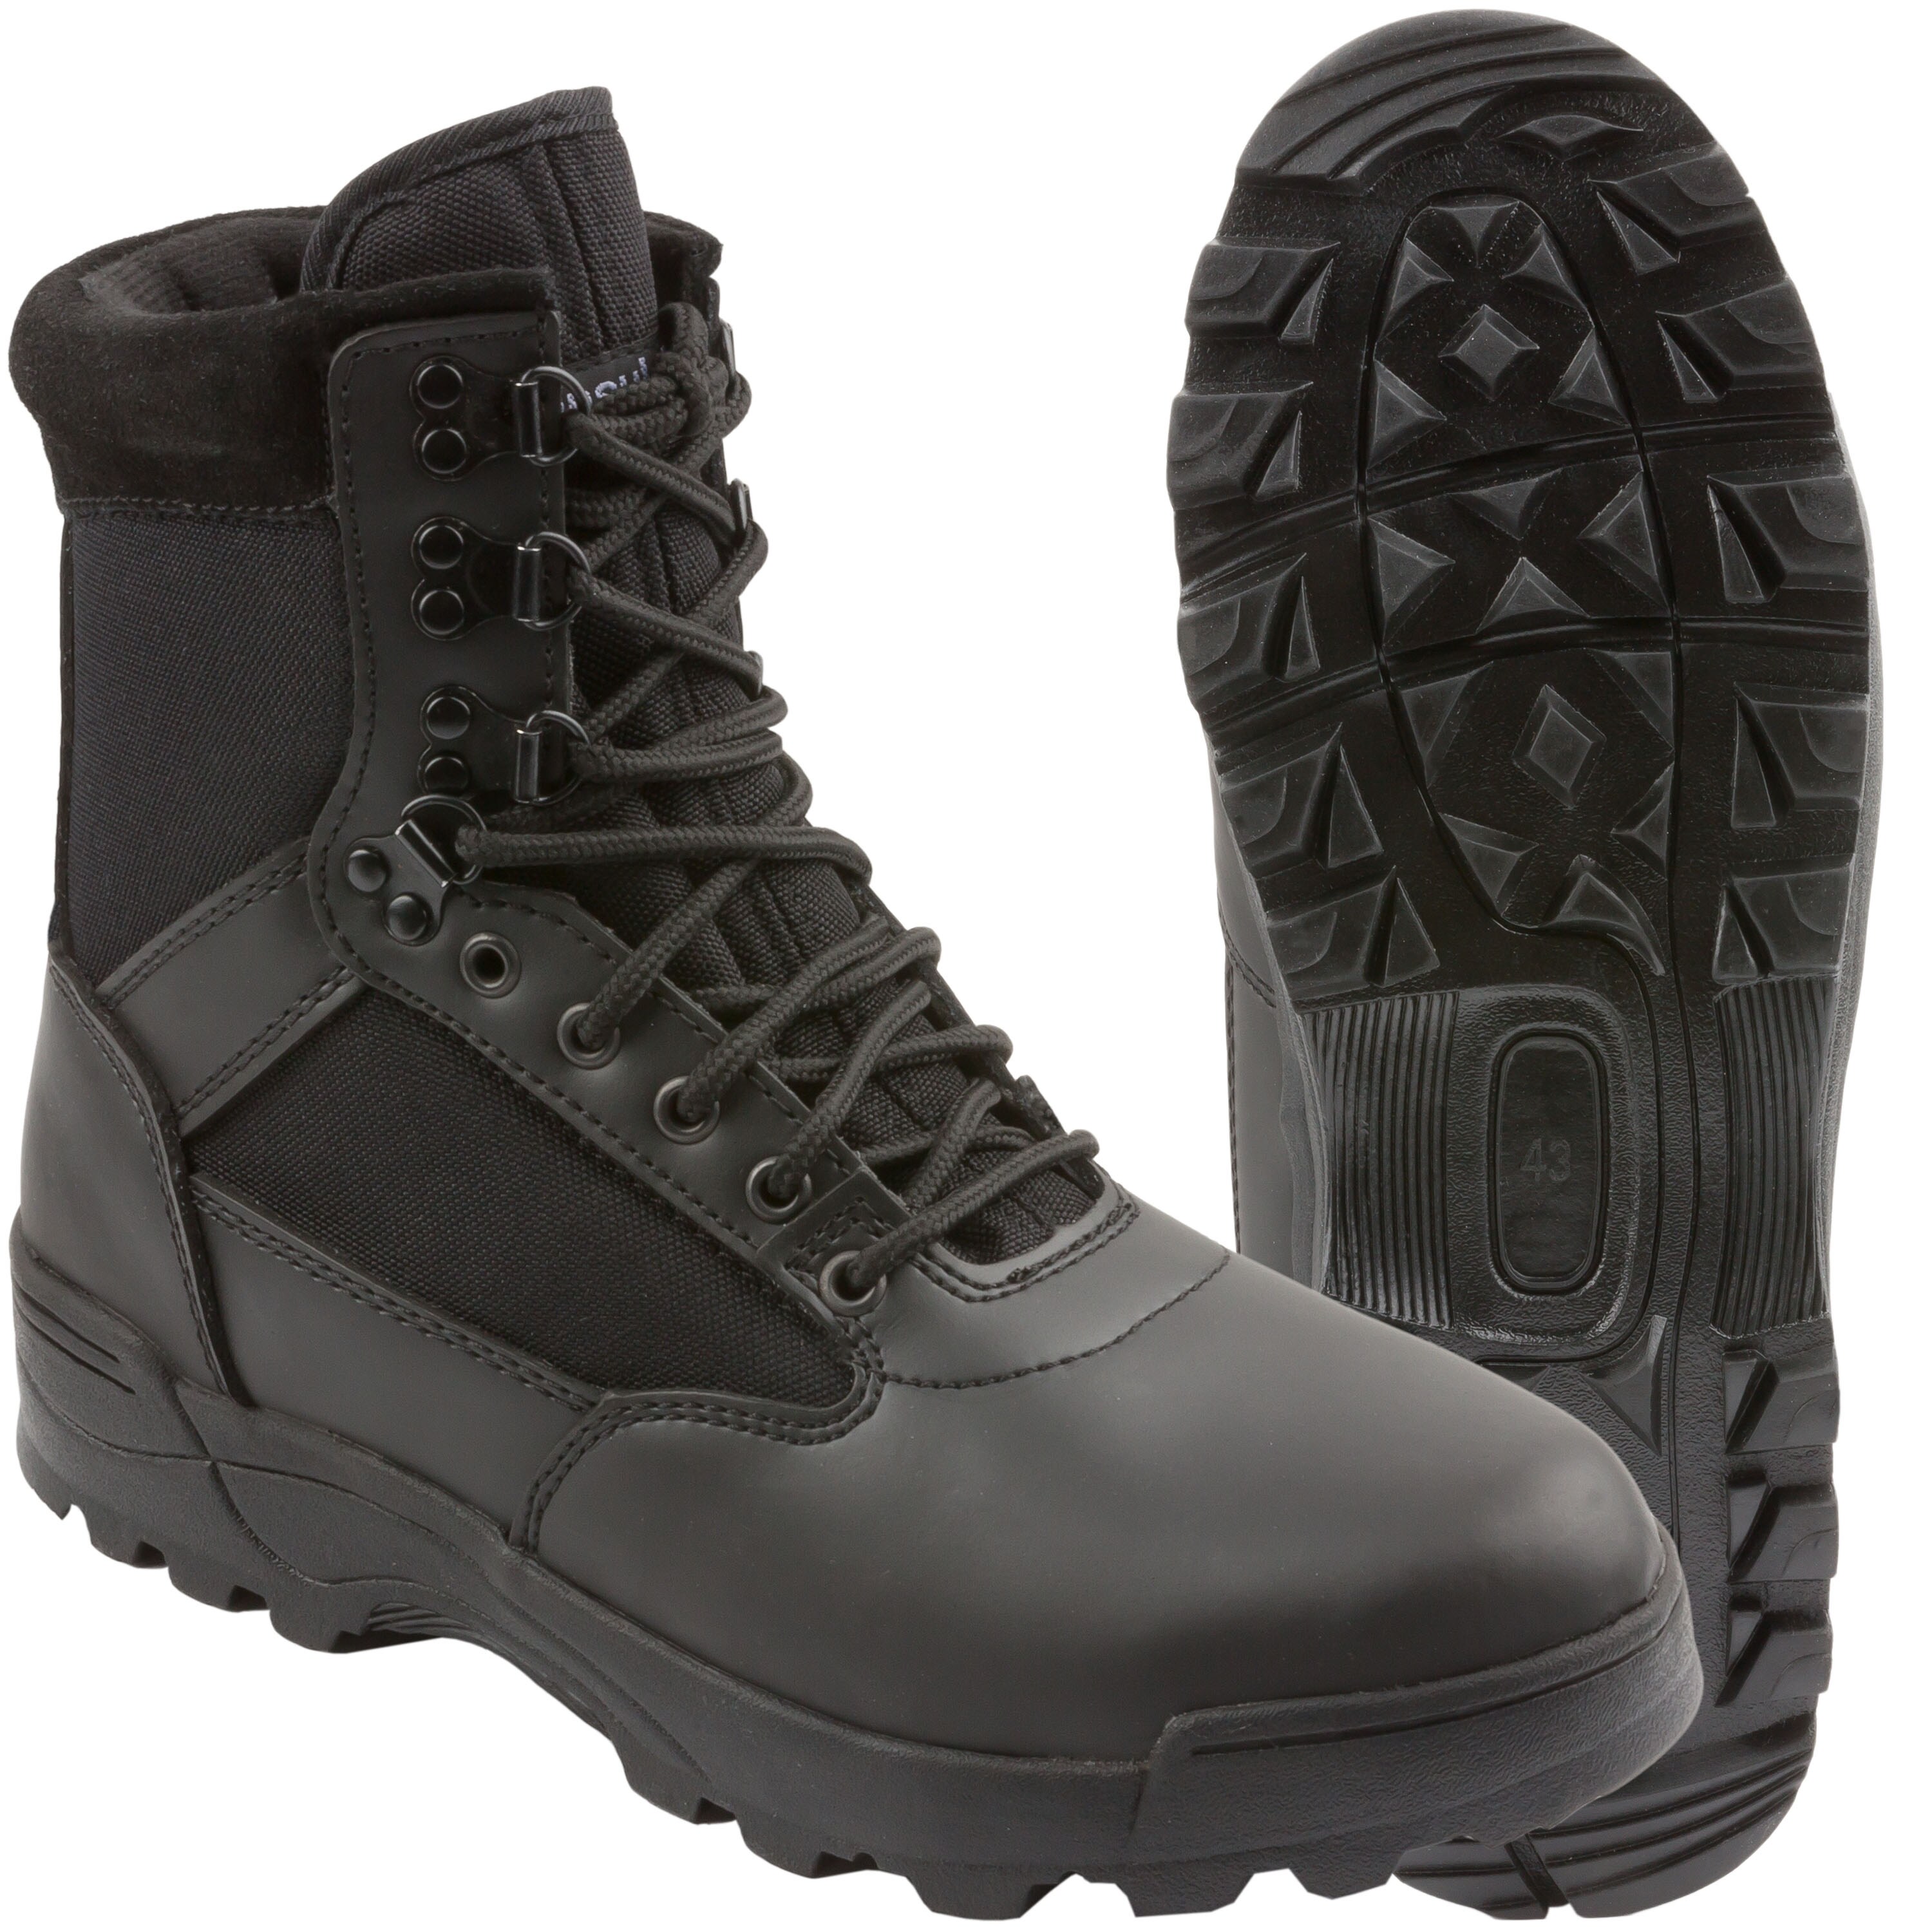 black tactical boots with zipper